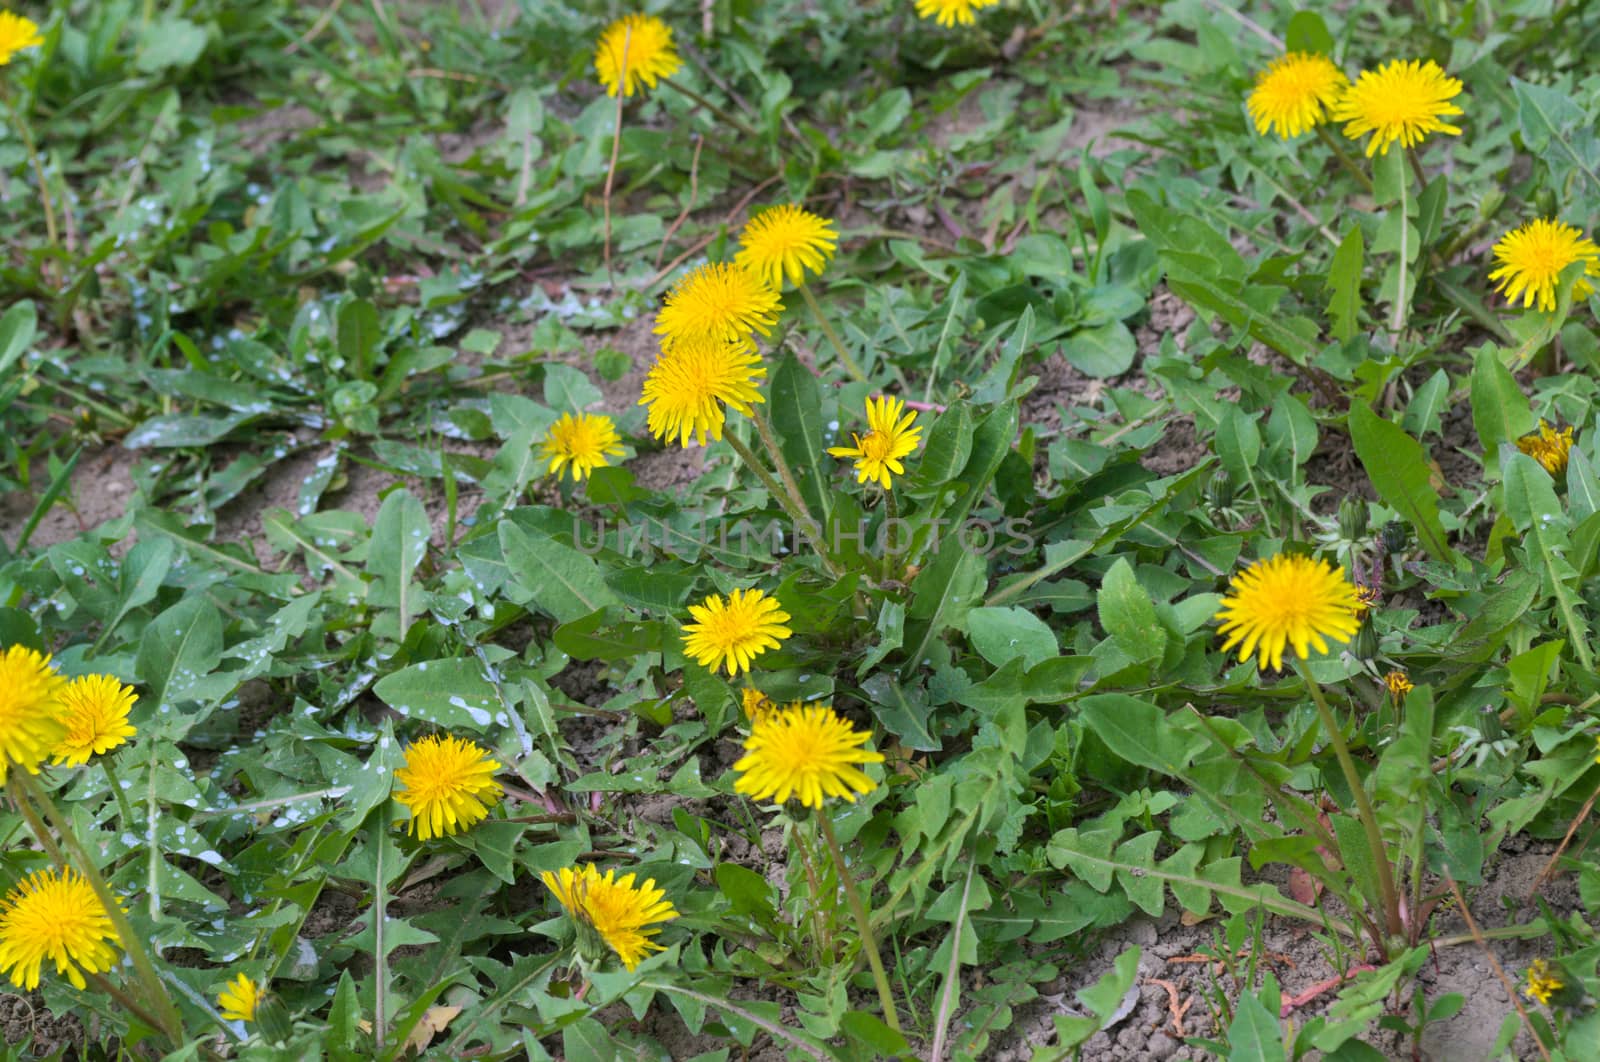 Dandelions blooming with yellow flowers at spring